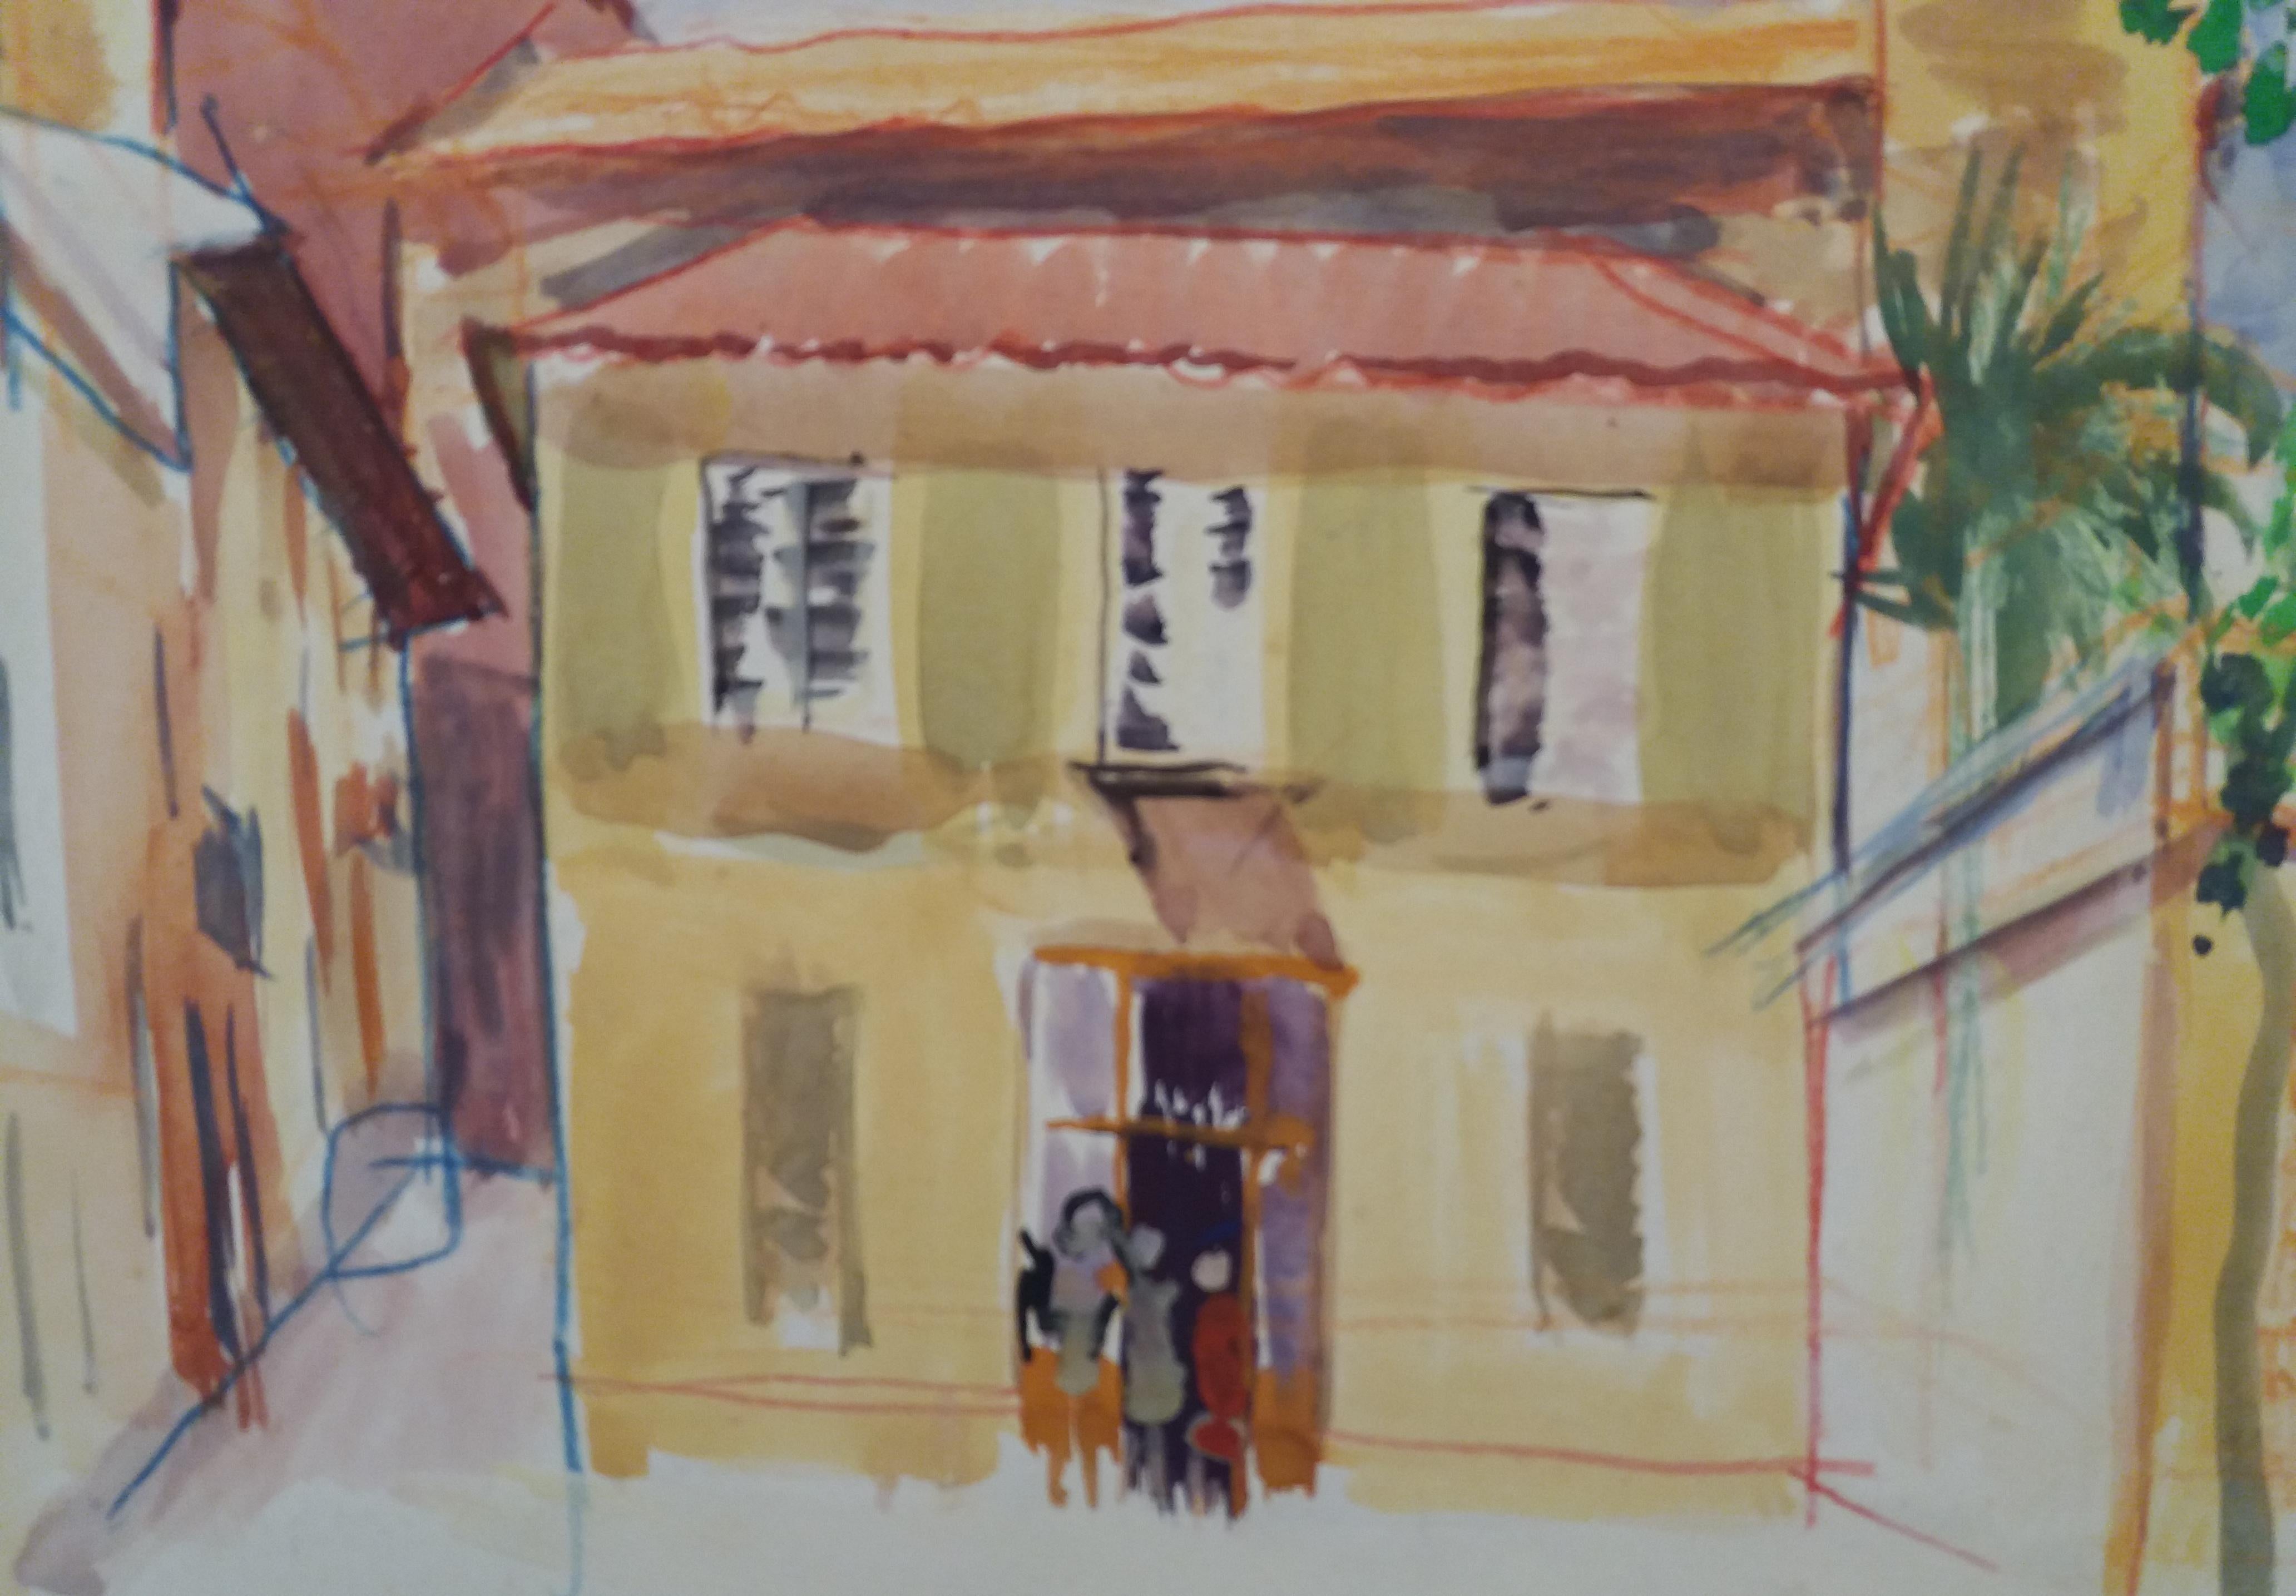 Barcelona watercolor original paper expressionist painting.
framed
MUNDO Ignasi 
Ignasi Mundó trained at the School of La Lonja, with Joaquín Mir, Mariano Pidelaserra and Manolo Hugué. In 1945 he received a scholarship travels to Paris, and later